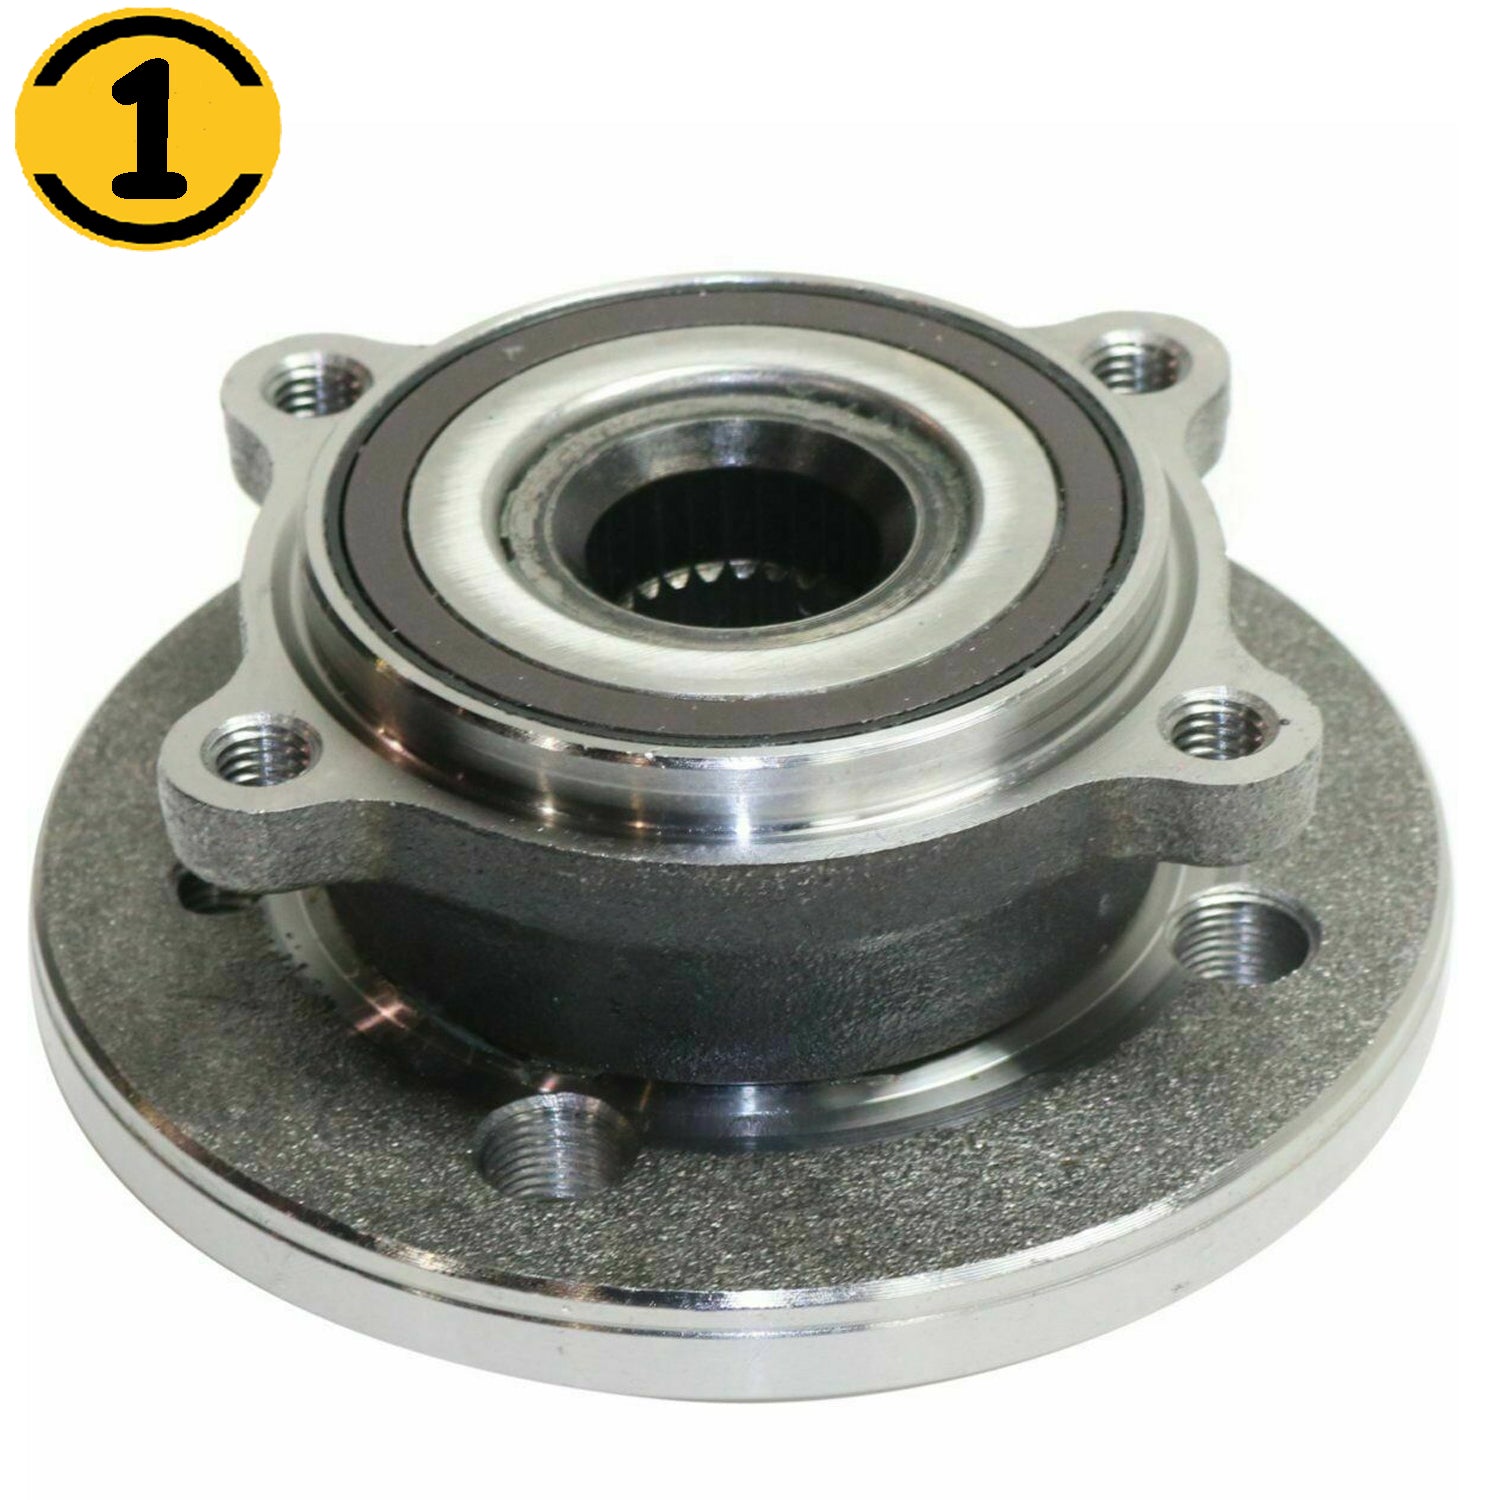 MotorbyMotor 513309 Front Wheel Bearing and Hub Assembly2WD FWD Fits for 2007-2015 Mini Cooper 4 Cyl Low-Runout OE Directly Replacement Hub Bearing MotorbyMotor